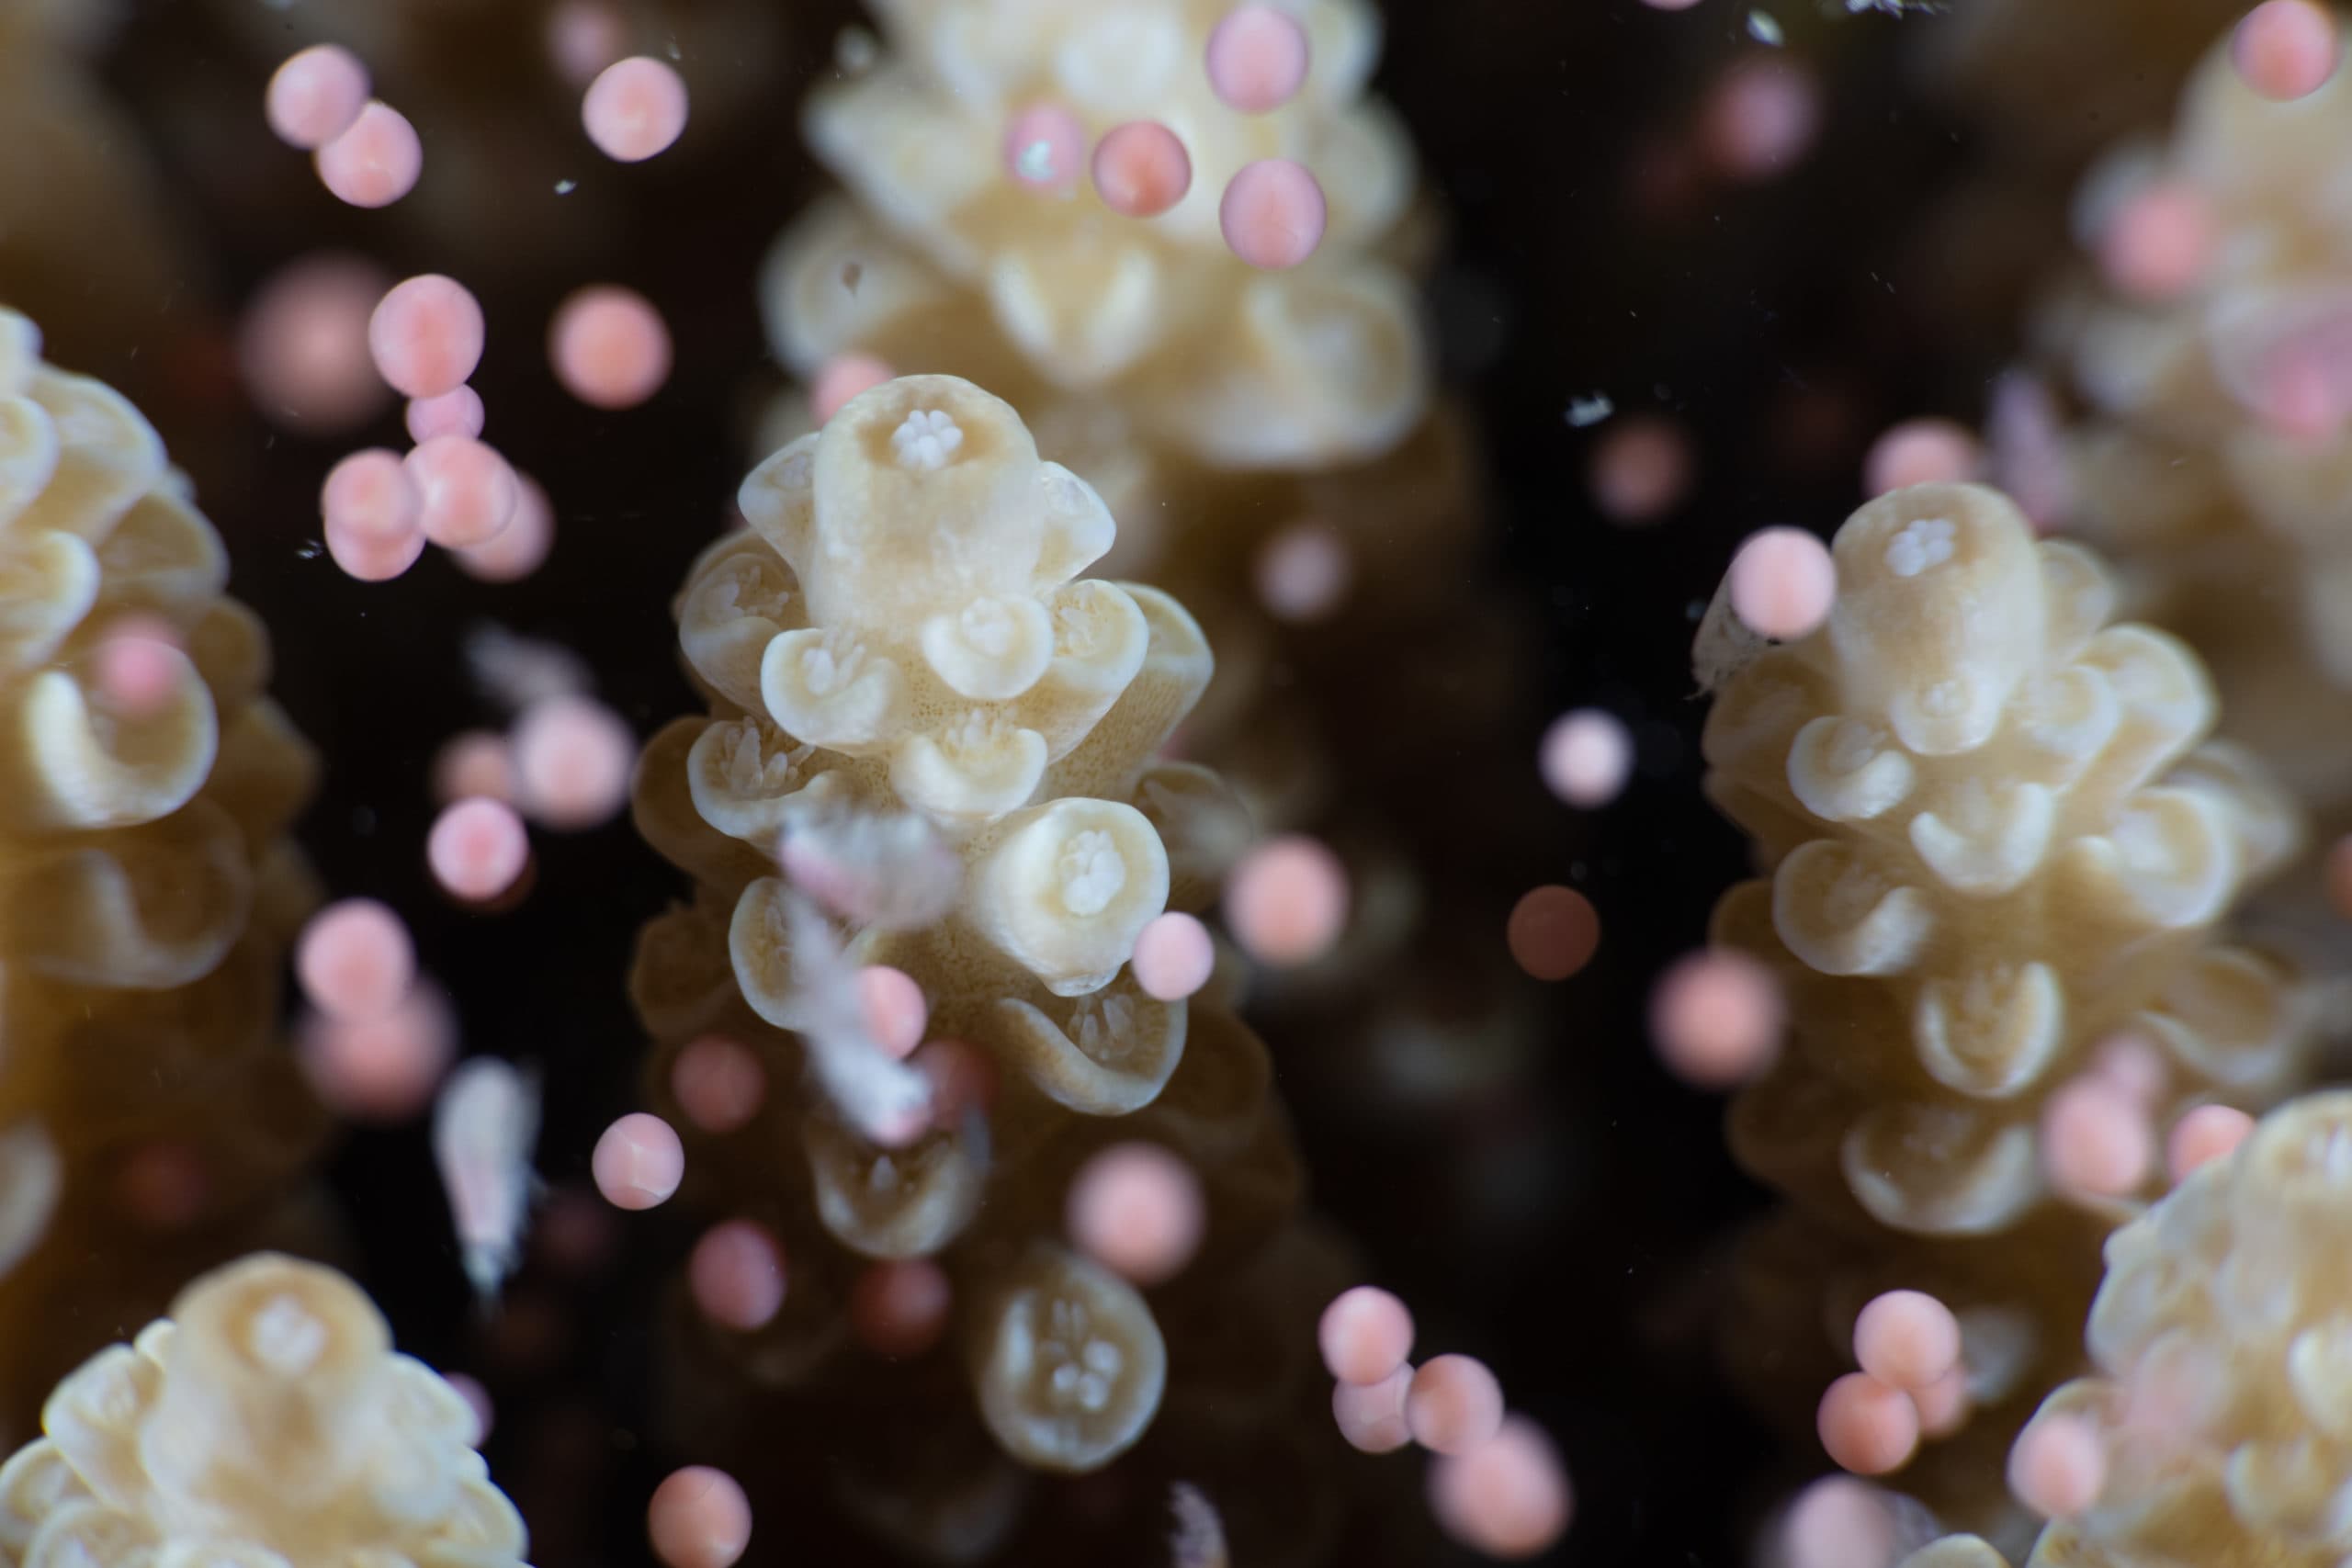 Coral releasing egg and sperm bundles spawn during annual coral spawning event